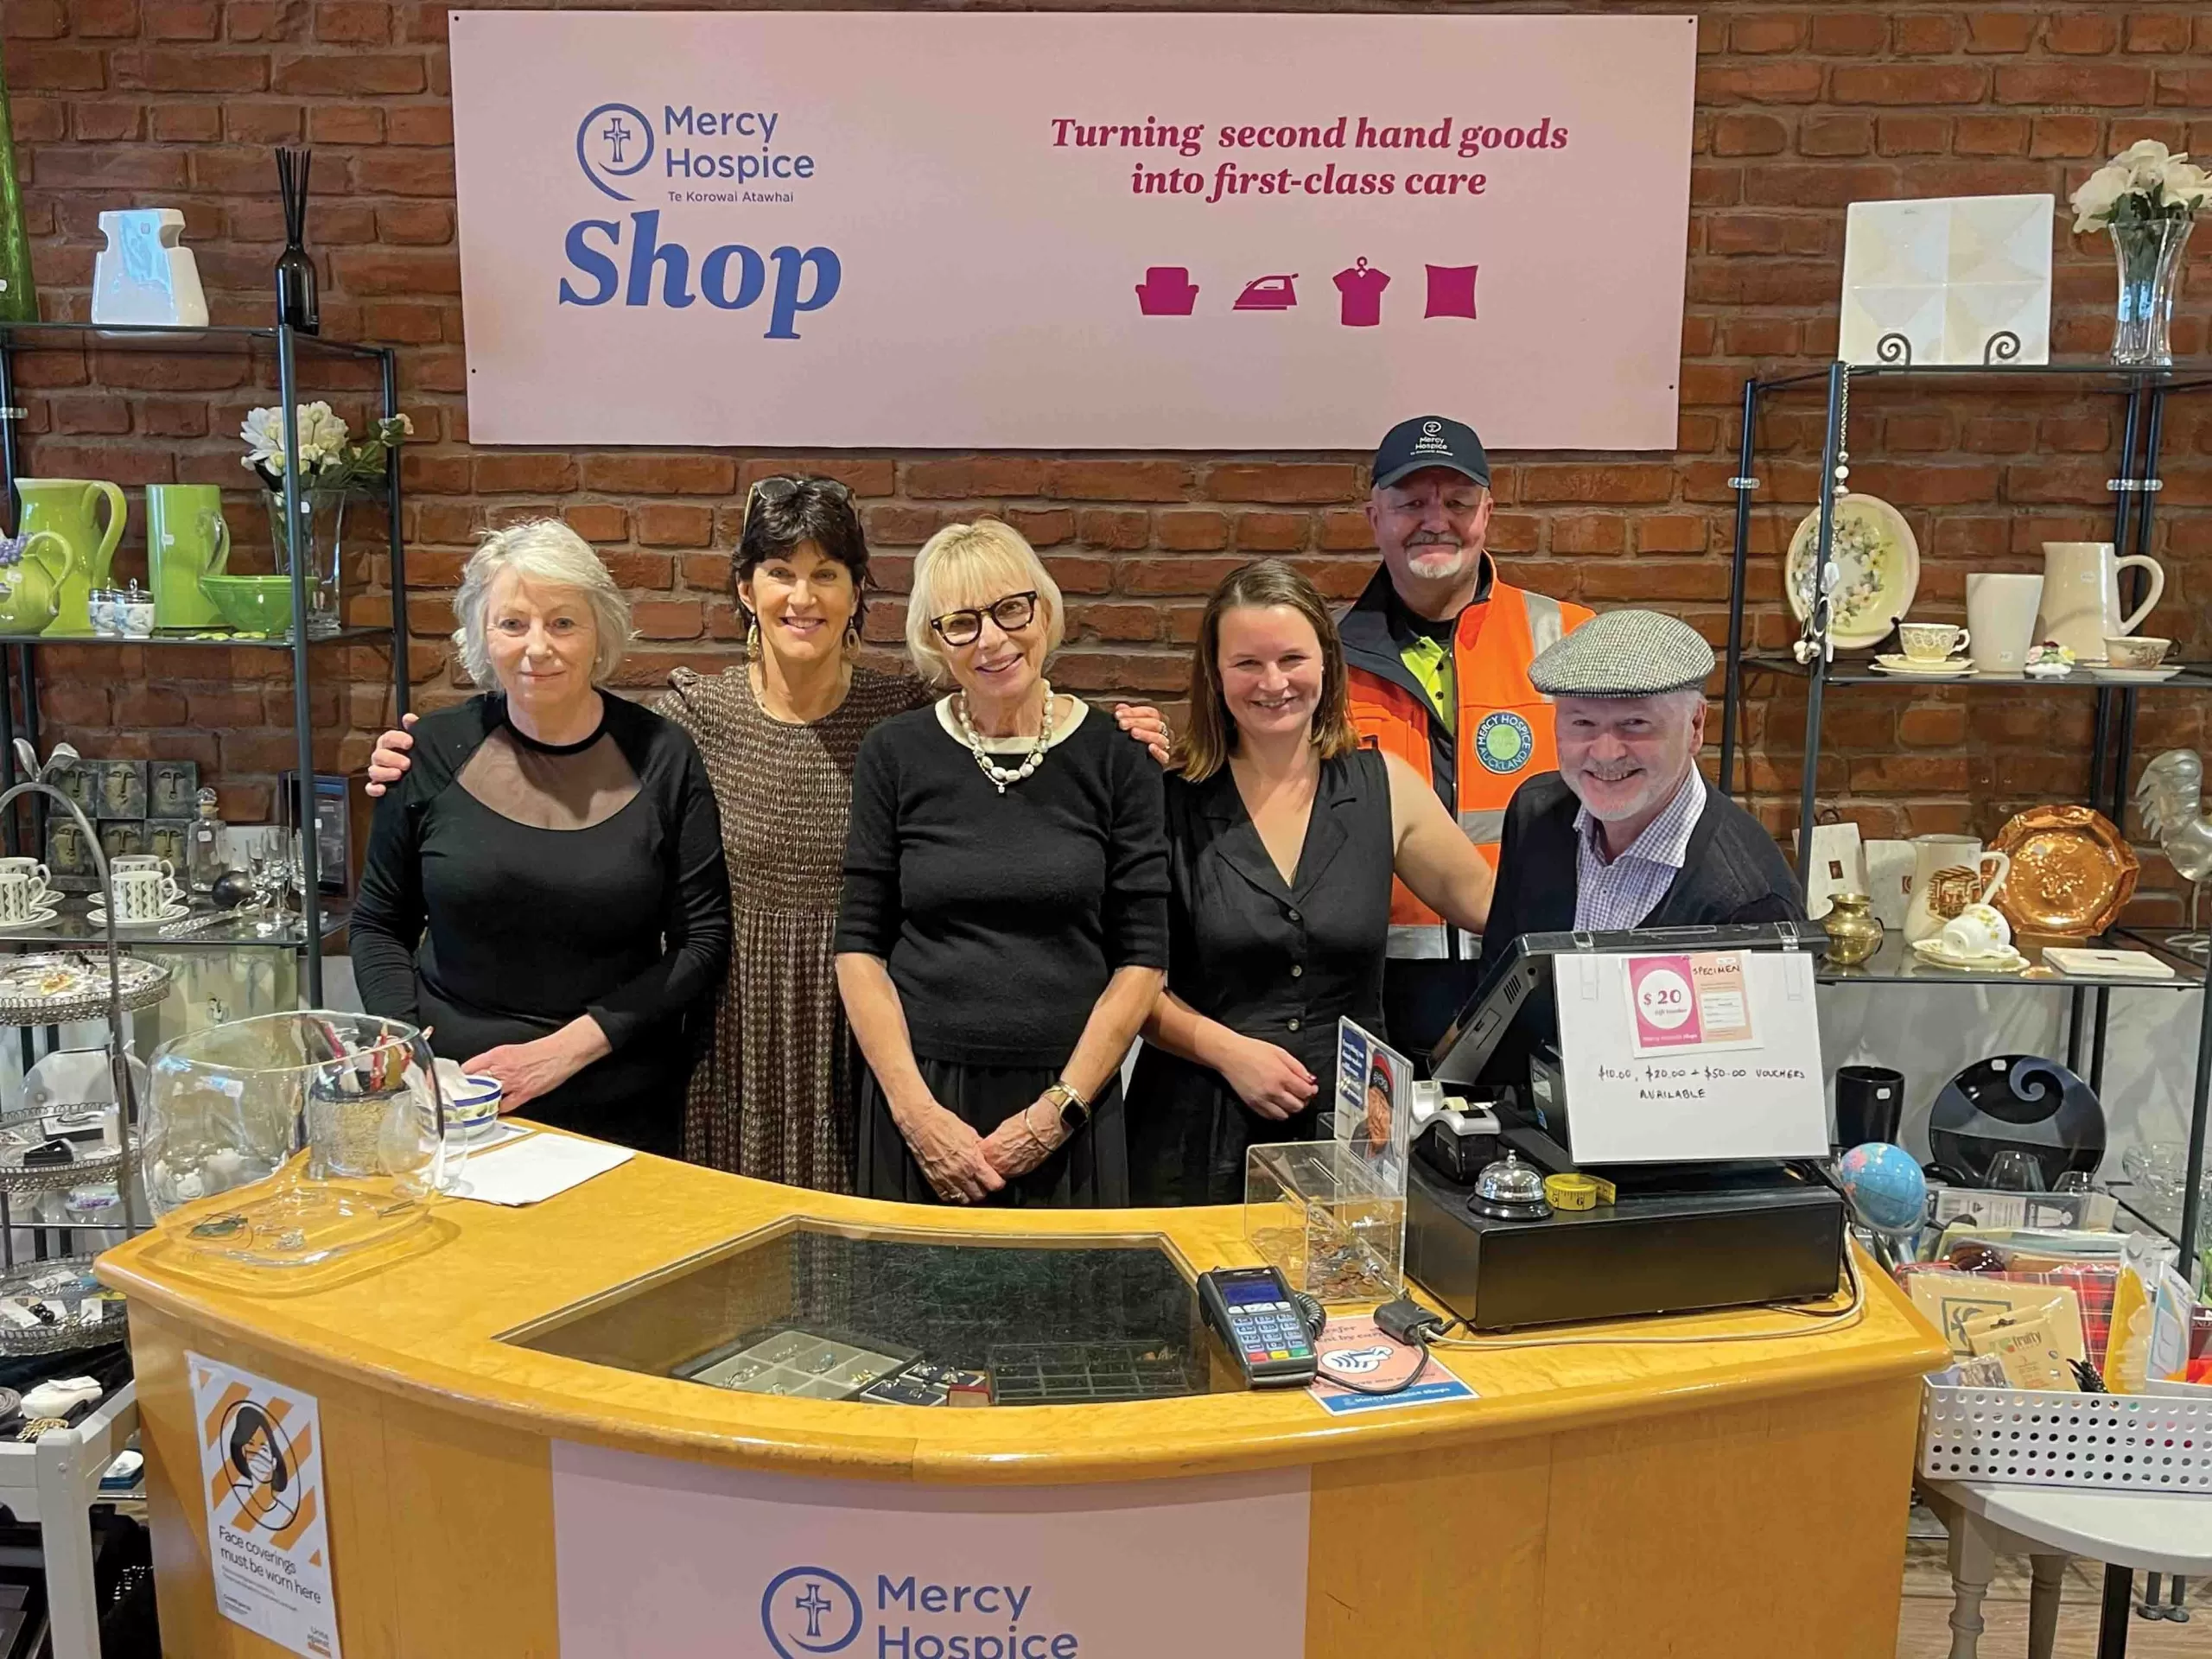 Mercy Hospice Ponsonby shop moves after 16 years